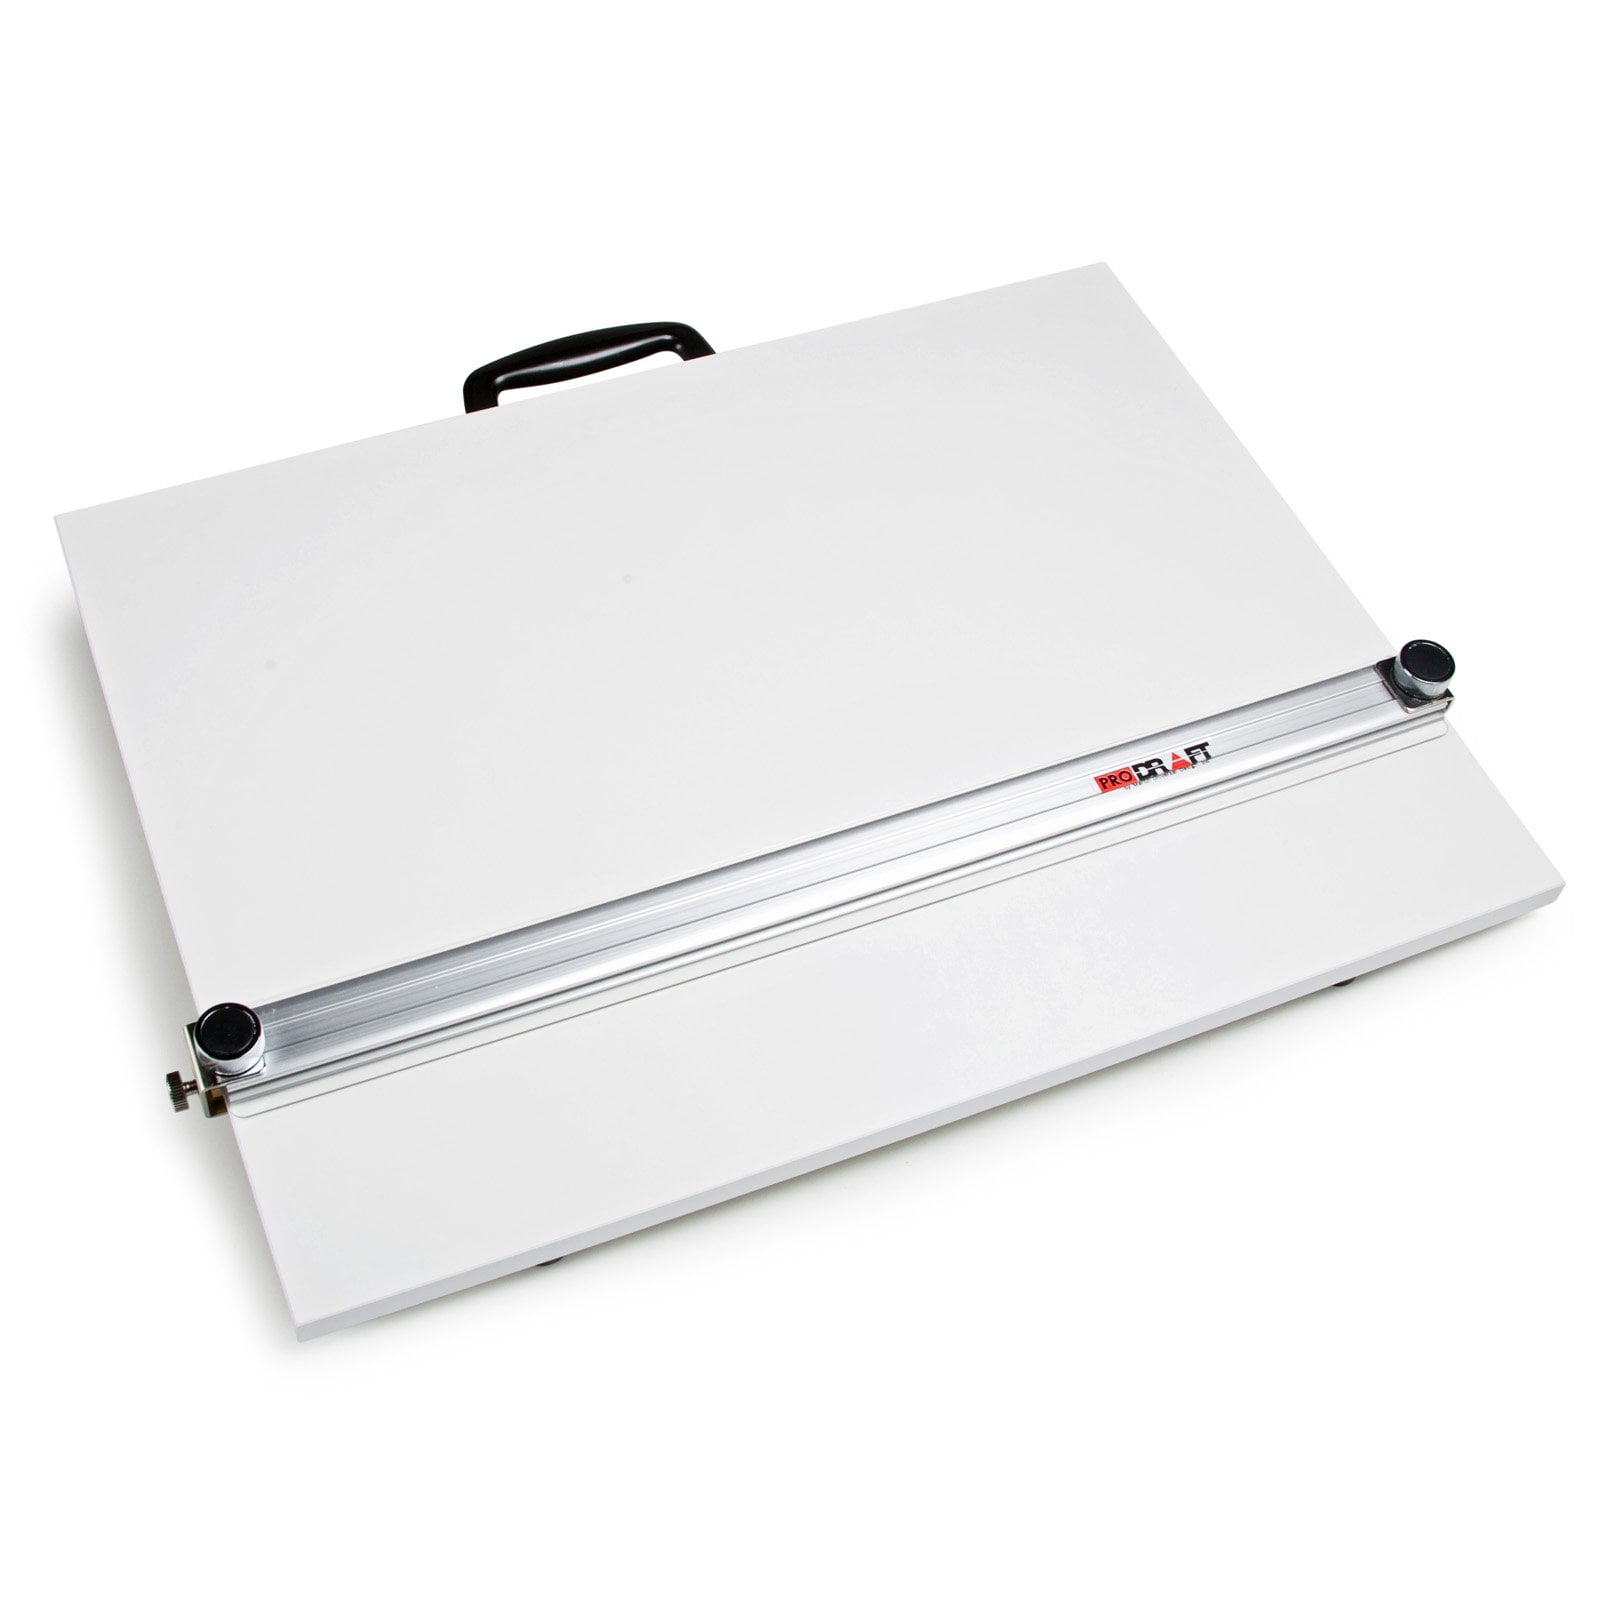 PXB Portable Parallel Straightedge Drawing Board 18 x 24